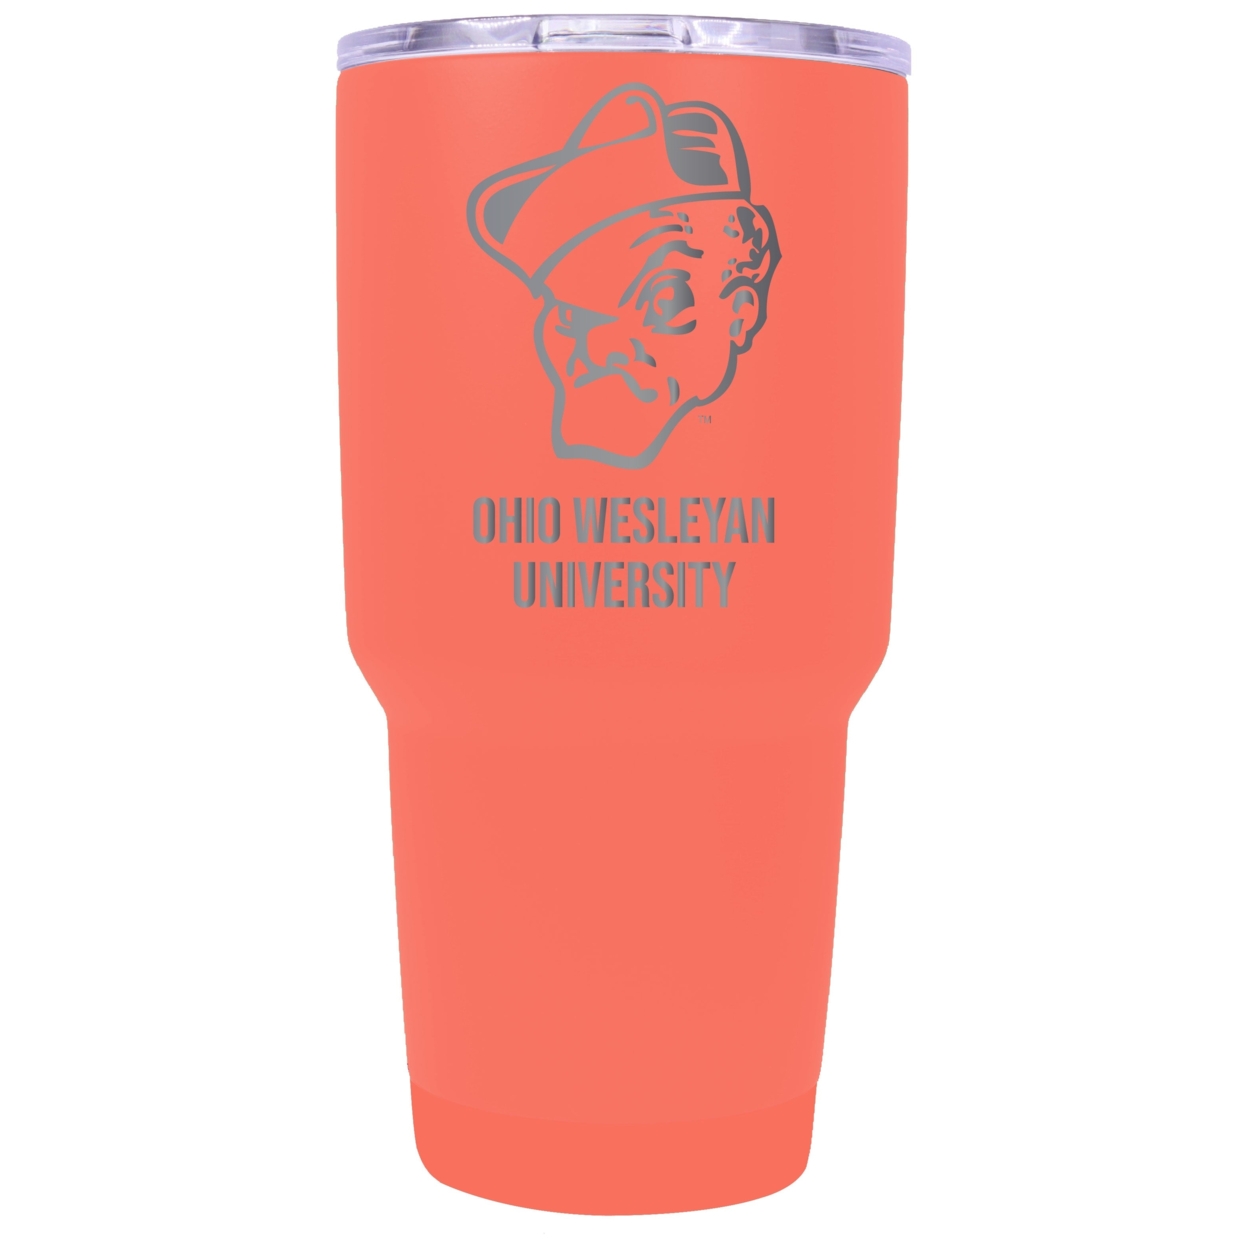 Ohio Wesleyan University 24 Oz Laser Engraved Stainless Steel Insulated Tumbler - Choose Your Color. - Red